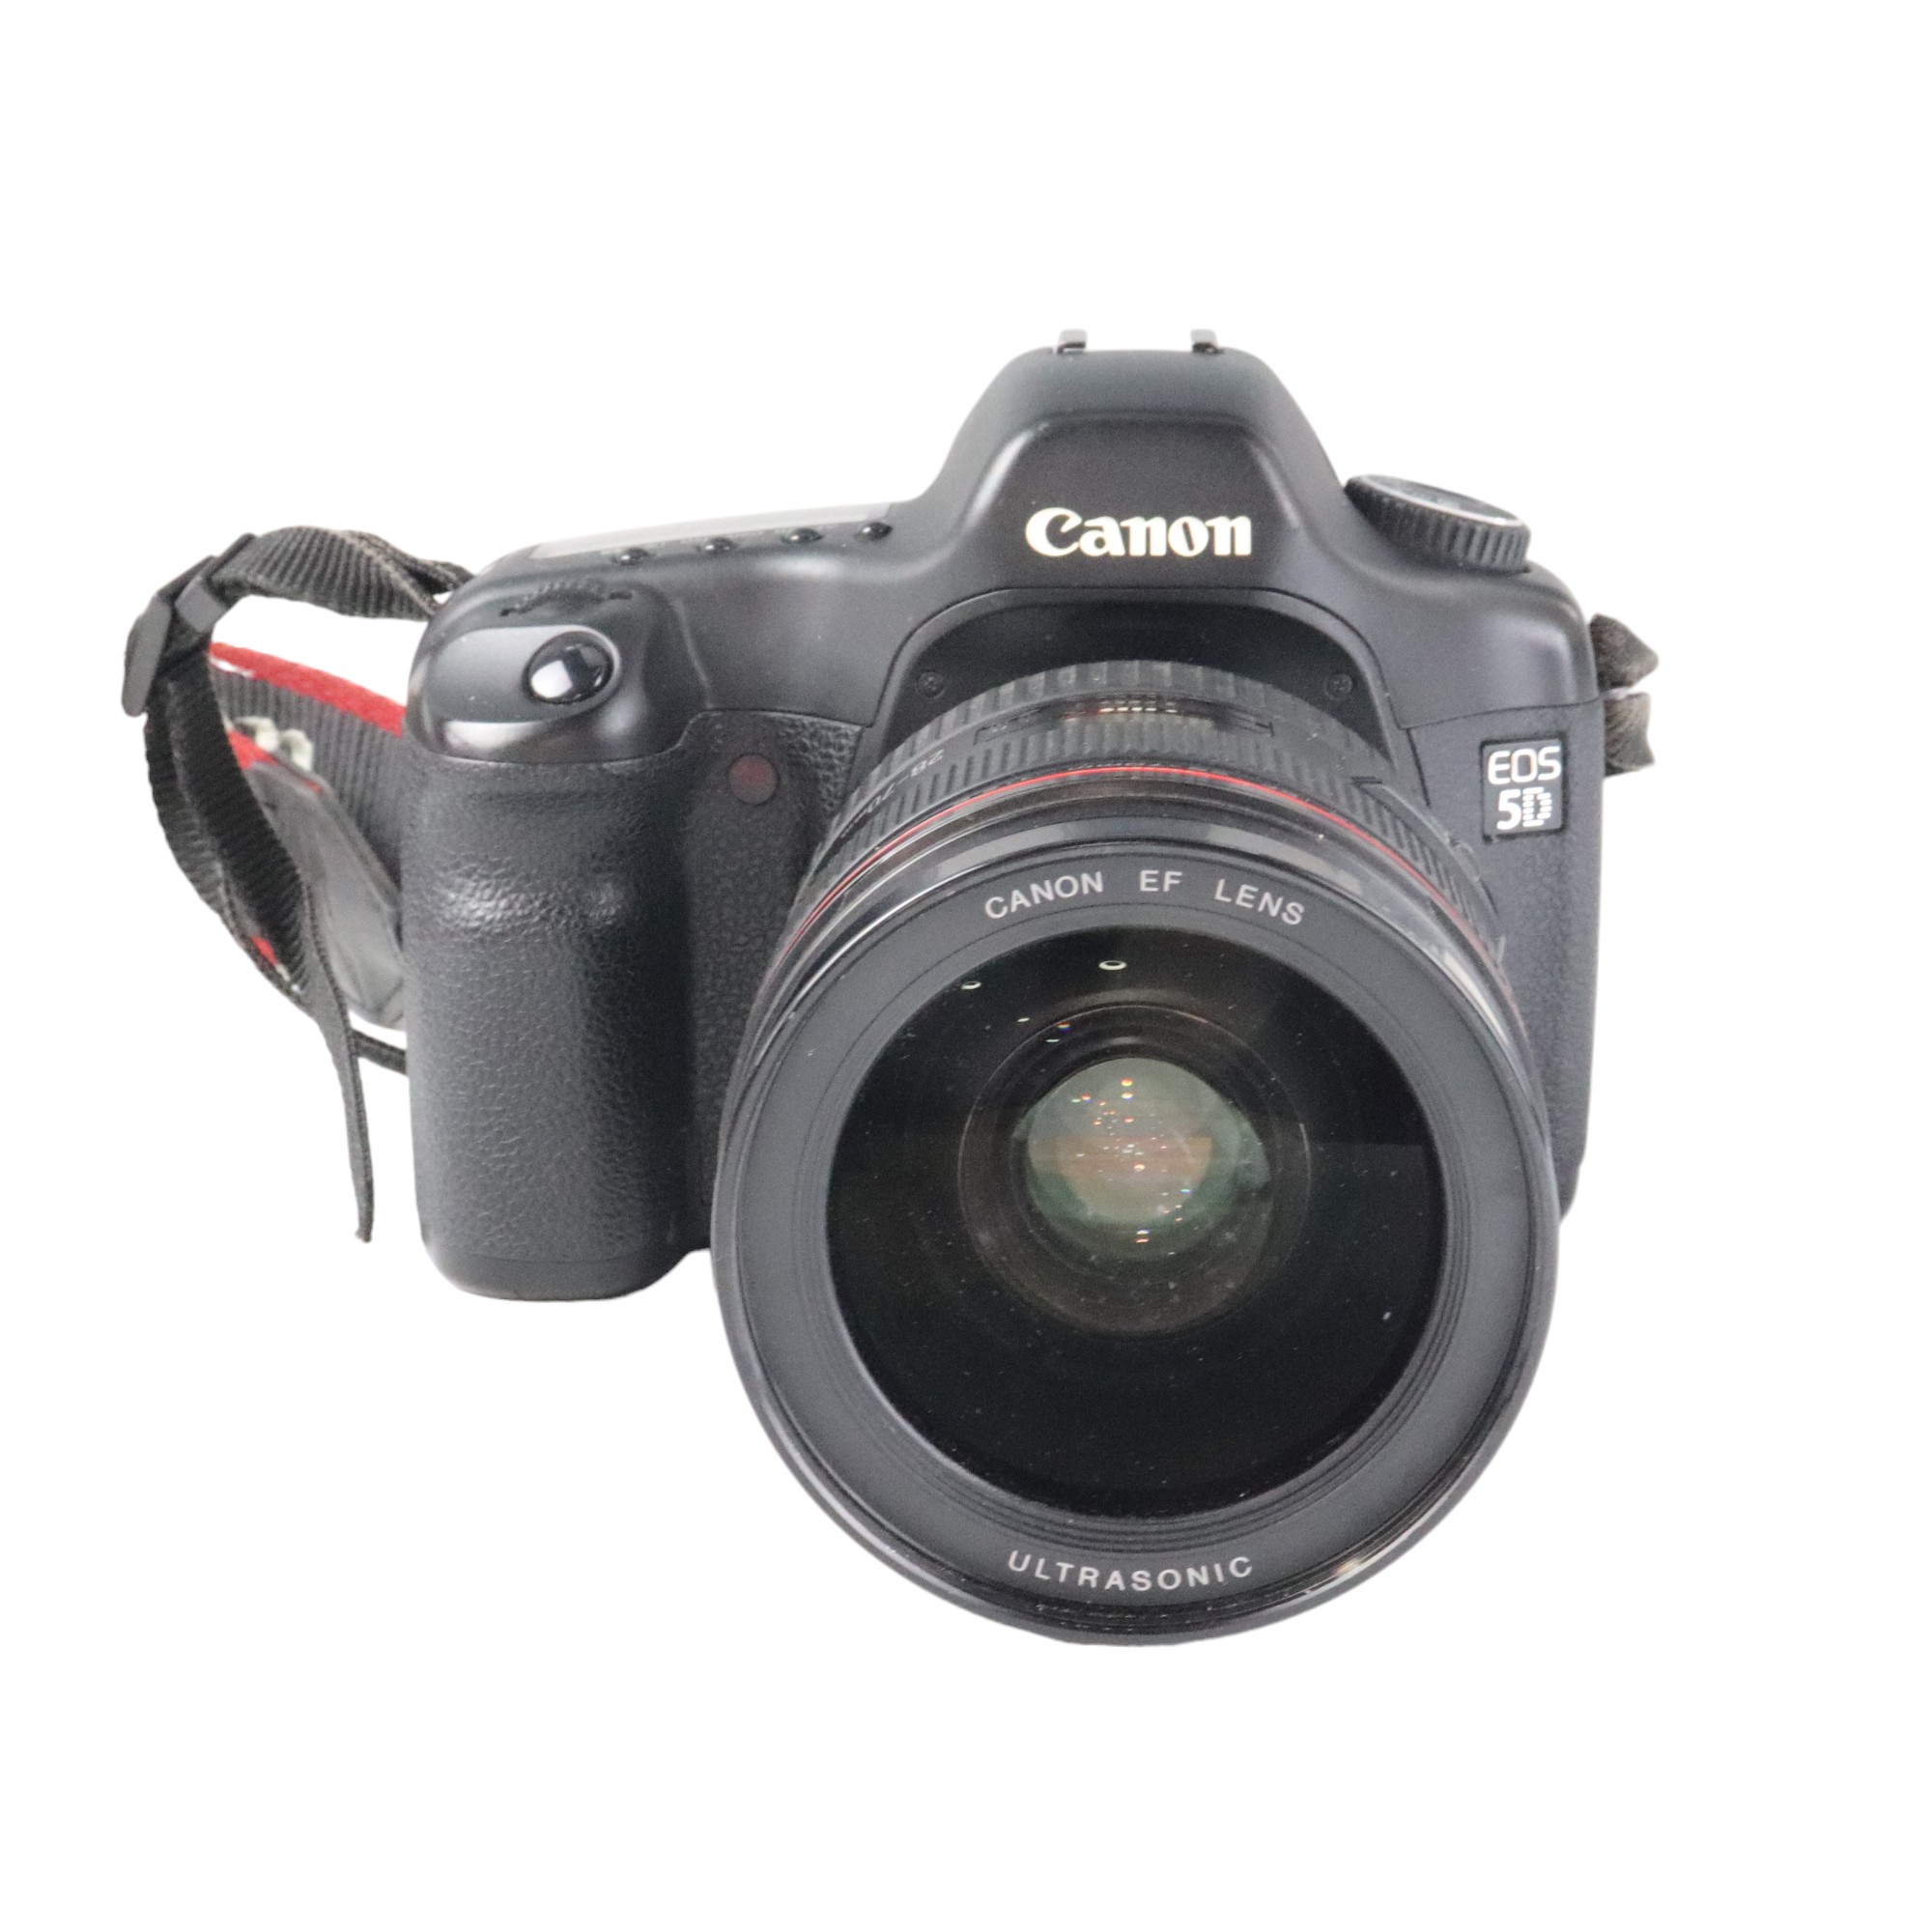 A Canon EOS 5D digital single-lens reflex camera mounted with an Ultrasonic Canon Zoom EF 28-70mm - Image 11 of 13